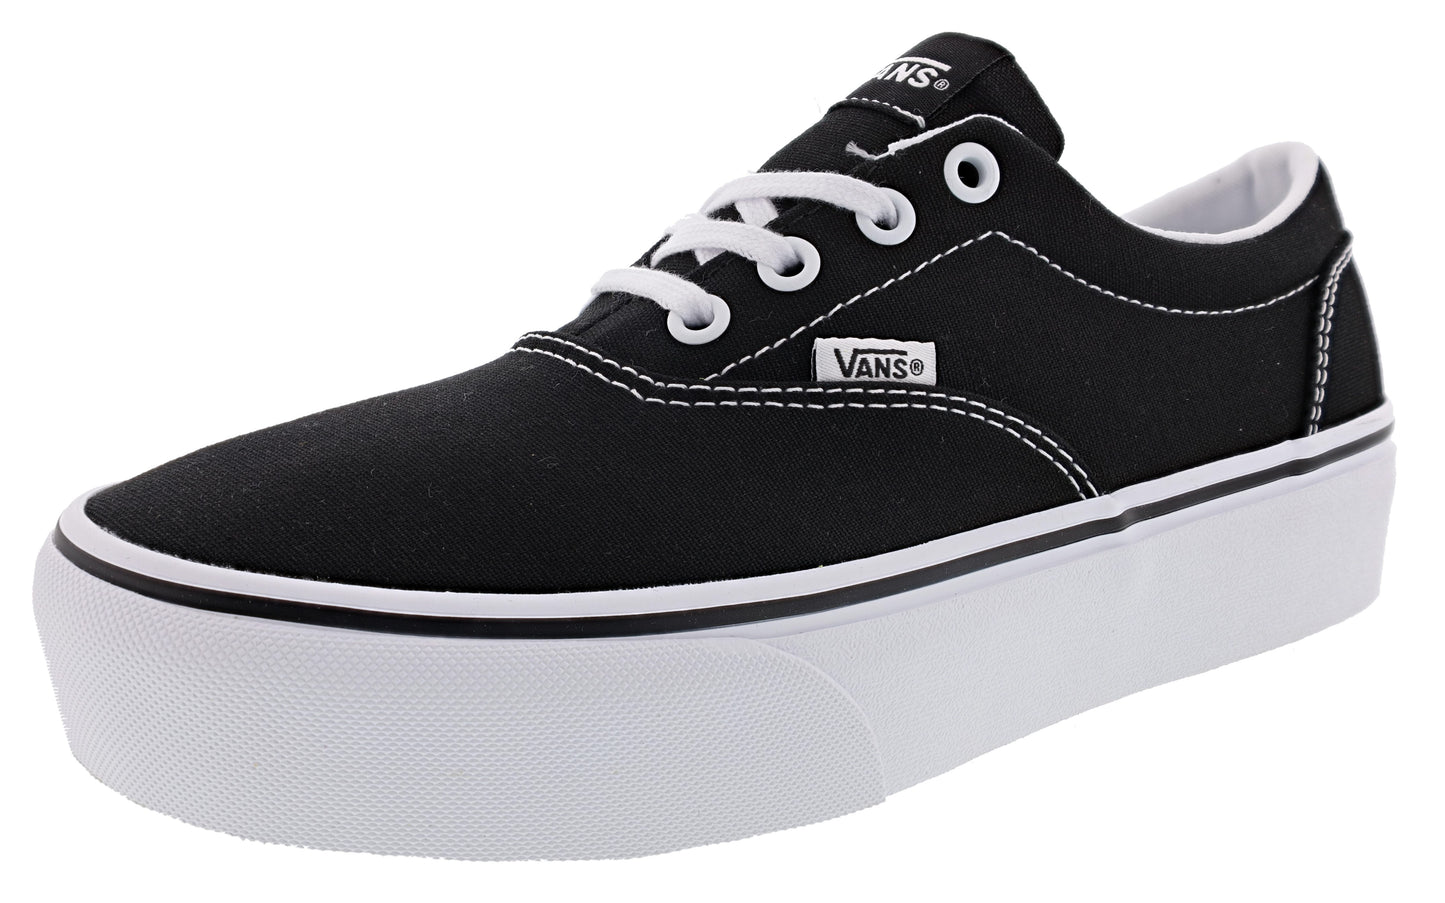 Womens Vans Authentic Casual Lace Up Canvas Plimsoll Low Top Sneakers